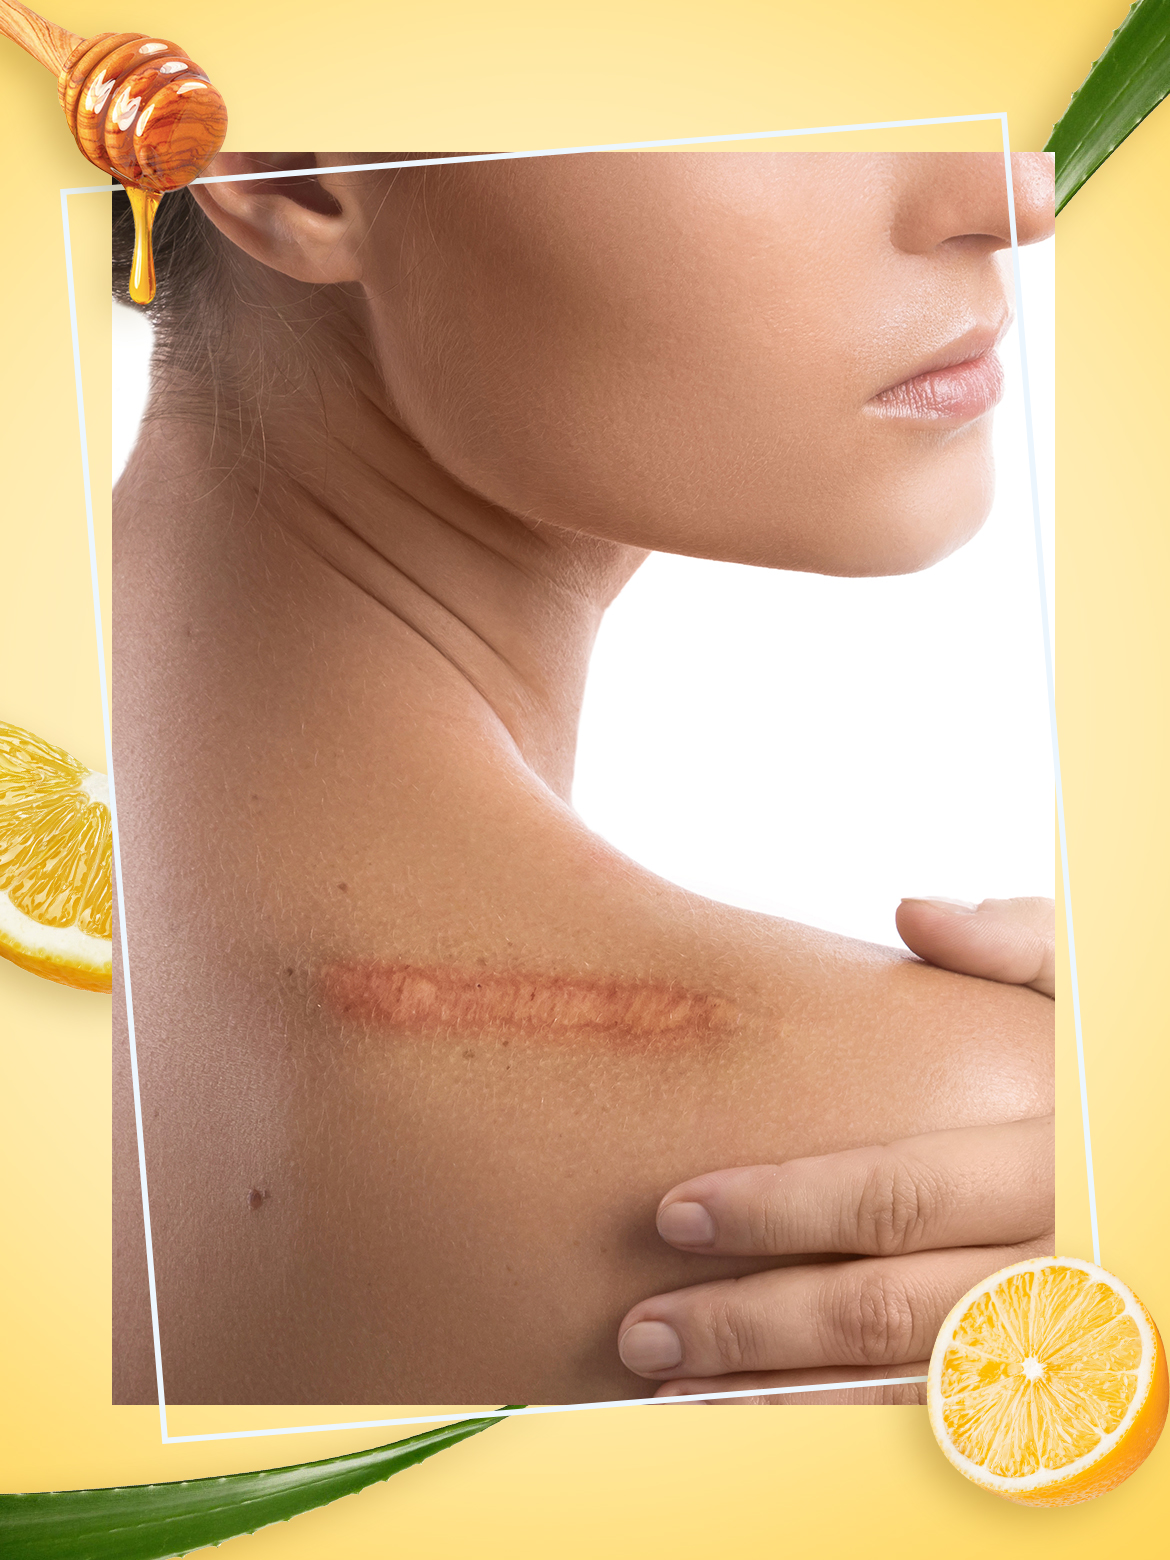 Easy Home Remedies You Can Try To Lighten Scars Naturally 5402